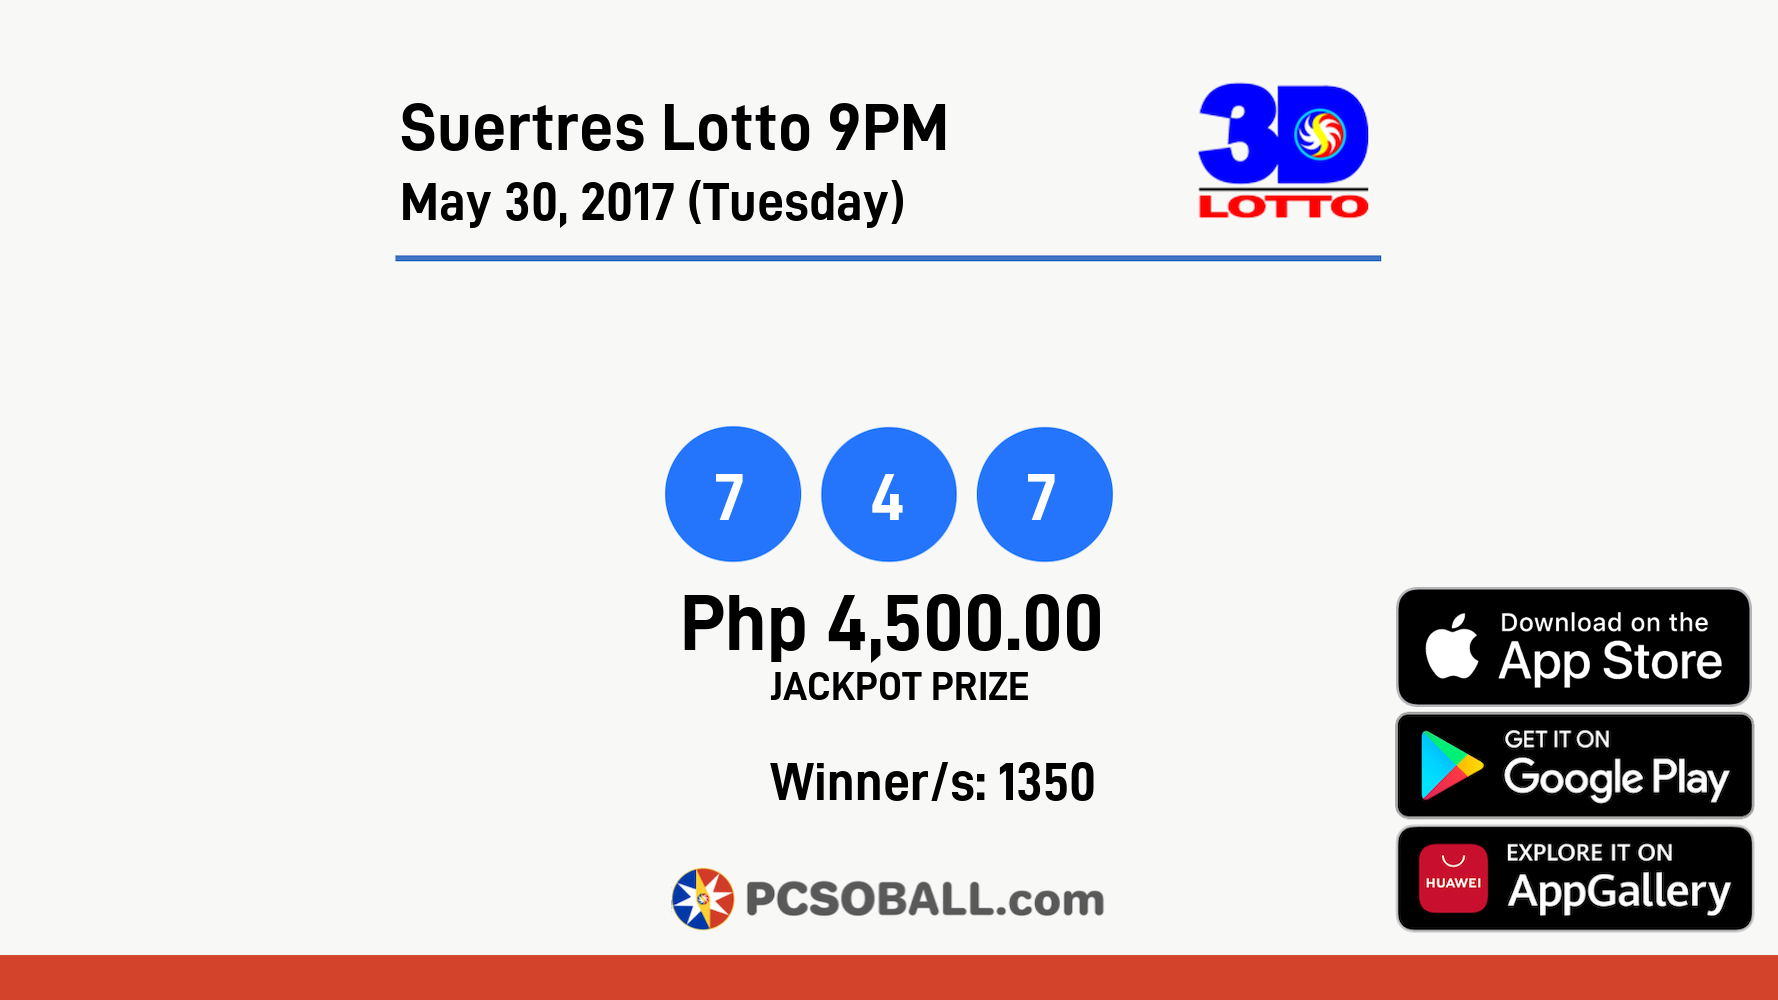 Suertres Lotto 9PM May 30, 2017 (Tuesday) Result